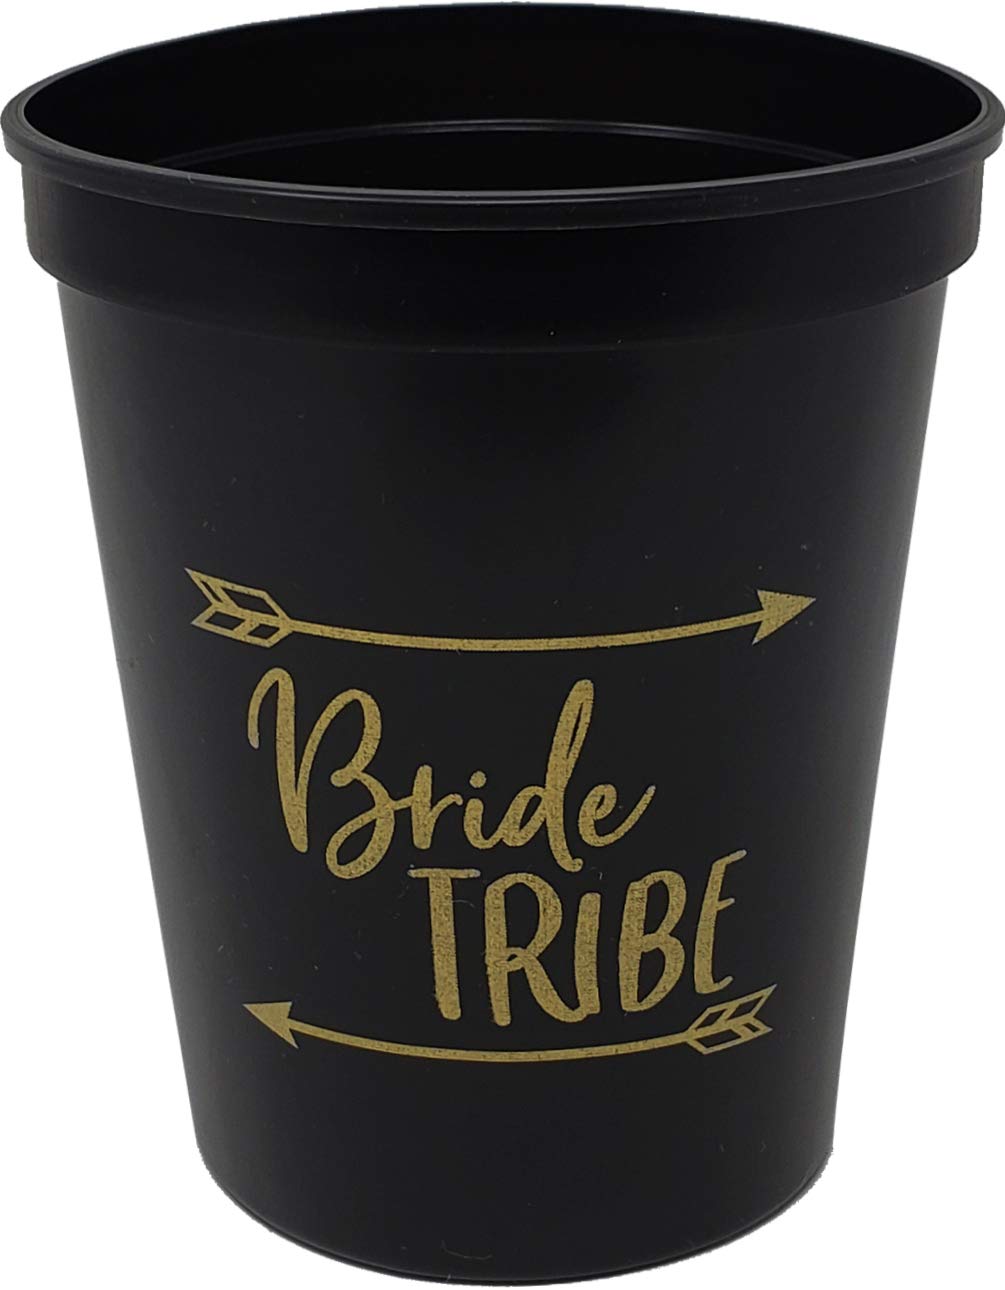 Bachelorette Bride & Bride Tribe 16 Oz Party Cups by Funky Junque